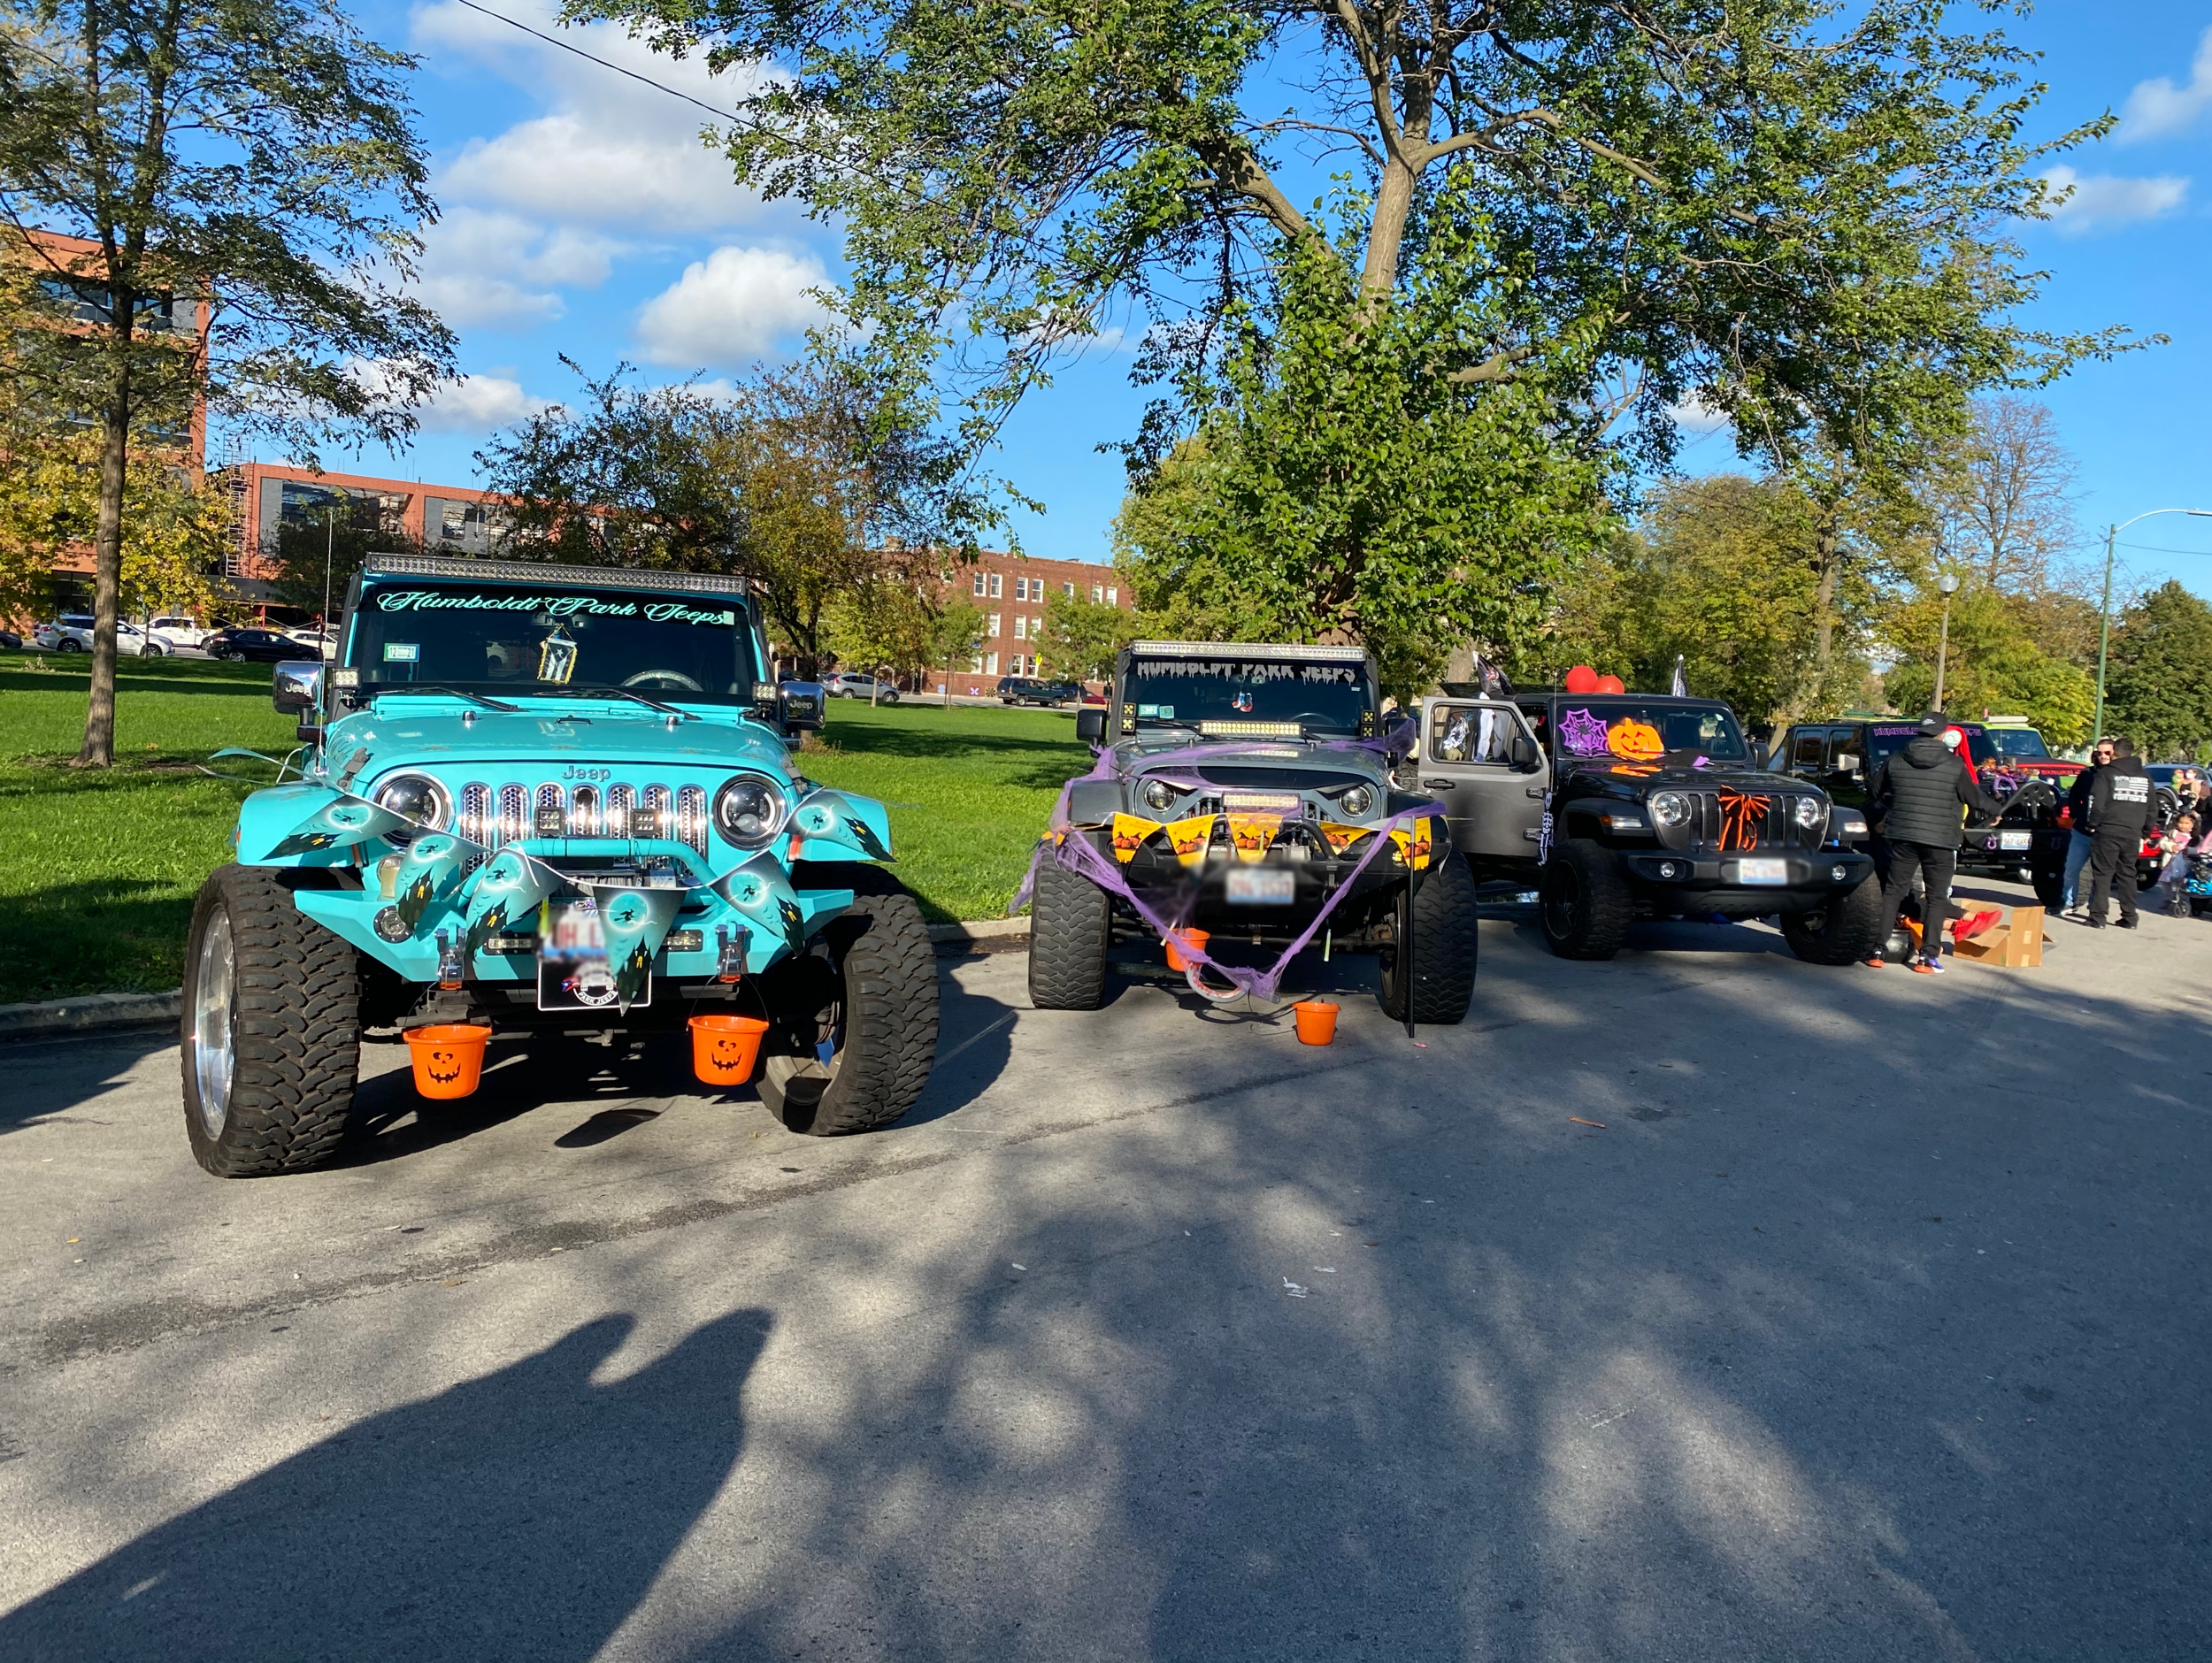 Trunk or Treat? Humboldt Park Jeeps Steer Halloween in Different Direction  — Free Spirit Media